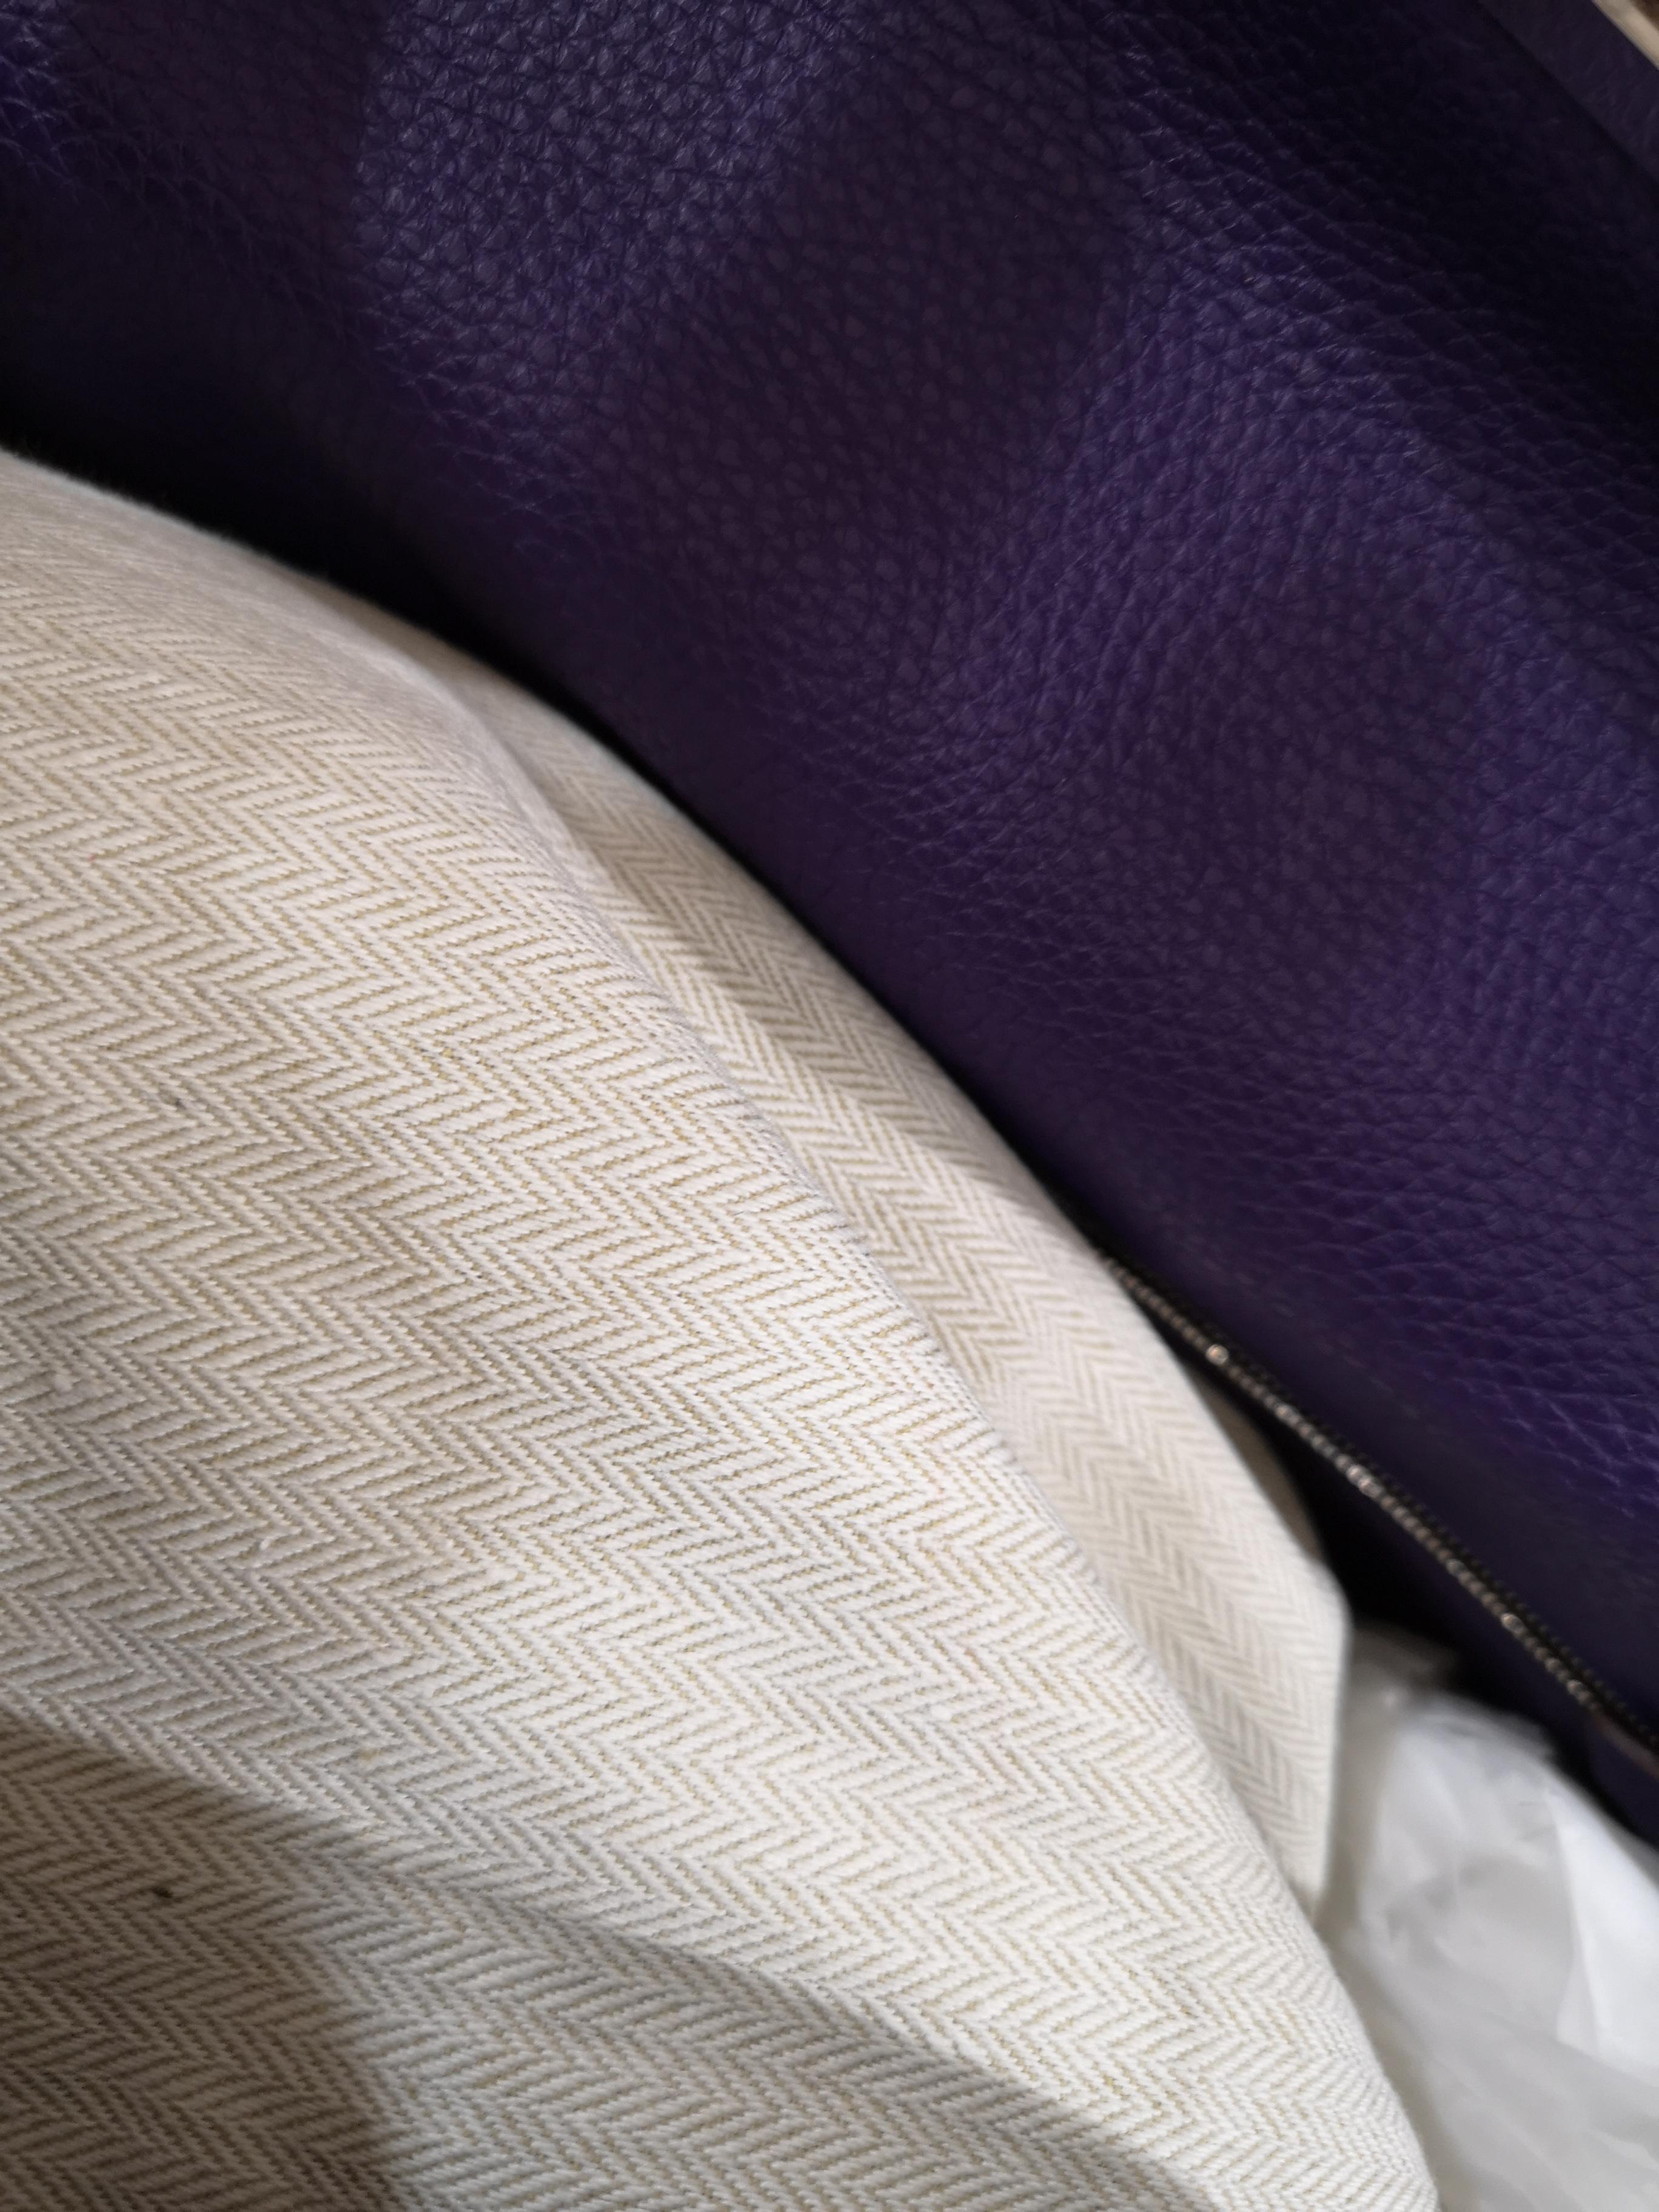 Hermès Kelly 40 UltraViolet
Crafted in France, this iconic ultraviolet leather Kelly 40 two-way handbag from Hermès Vintage features top handles, a detachable and adjustable shoulder strap, a hanging leather tag, silver-tone hardware, a twist lock